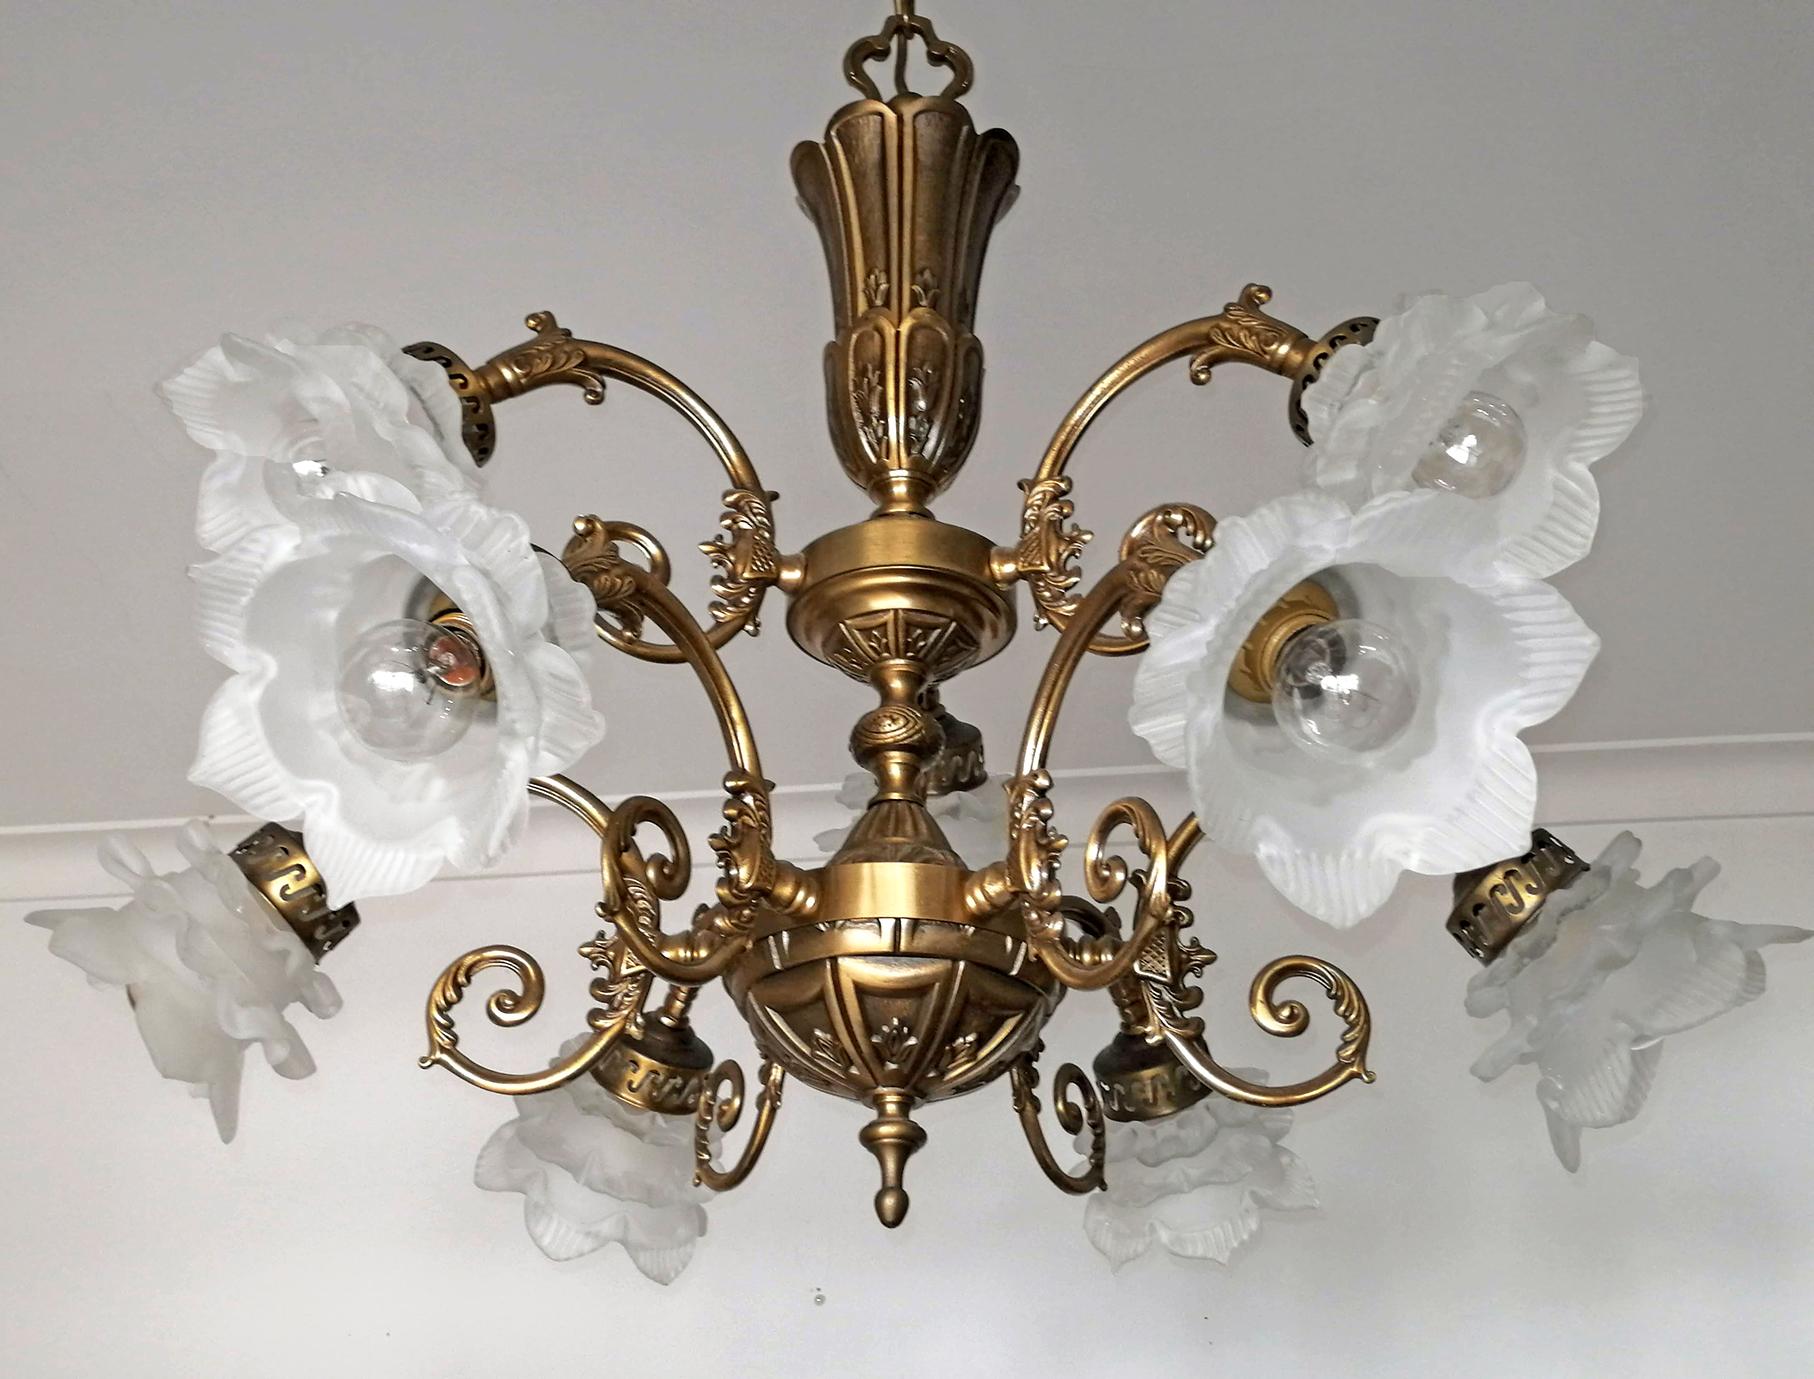 Ornate French Art Nouveau and Art Deco 2 tiers, frosted satin art glass flower petal lamp shades chandelier

Measures: 
Diameter 29.5 in/ 75 cm
Height 33.4 in / 85 cm
Weight 15 Kg / 32 lb
9-light bulbs E14 good working condition
Assembly